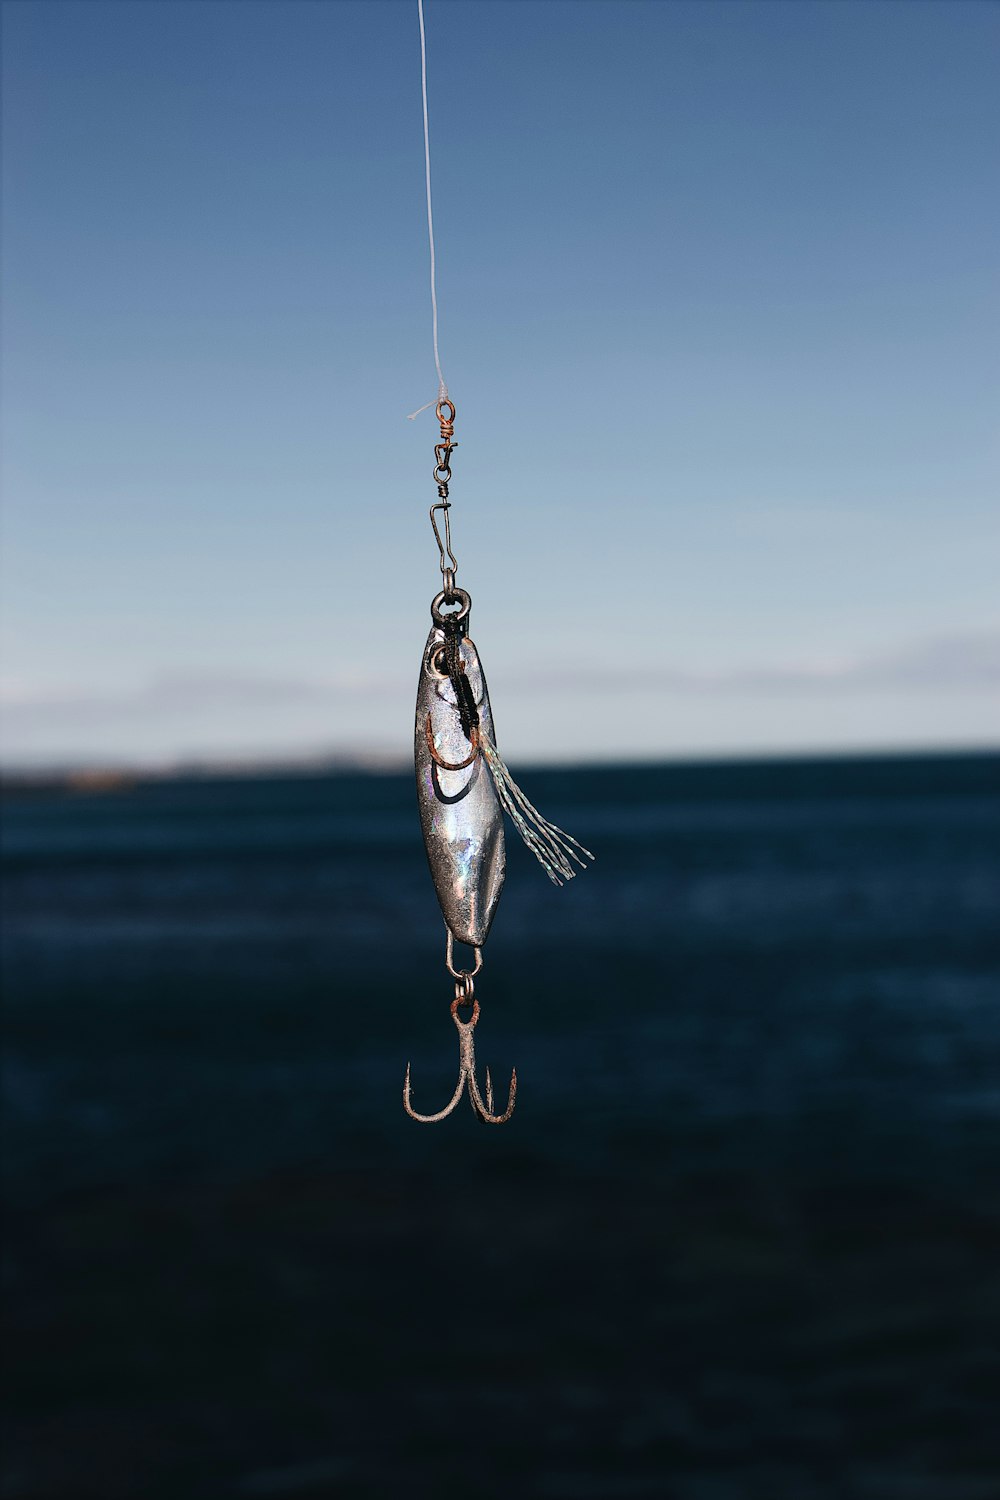 Fishing Hook Pictures  Download Free Images on Unsplash